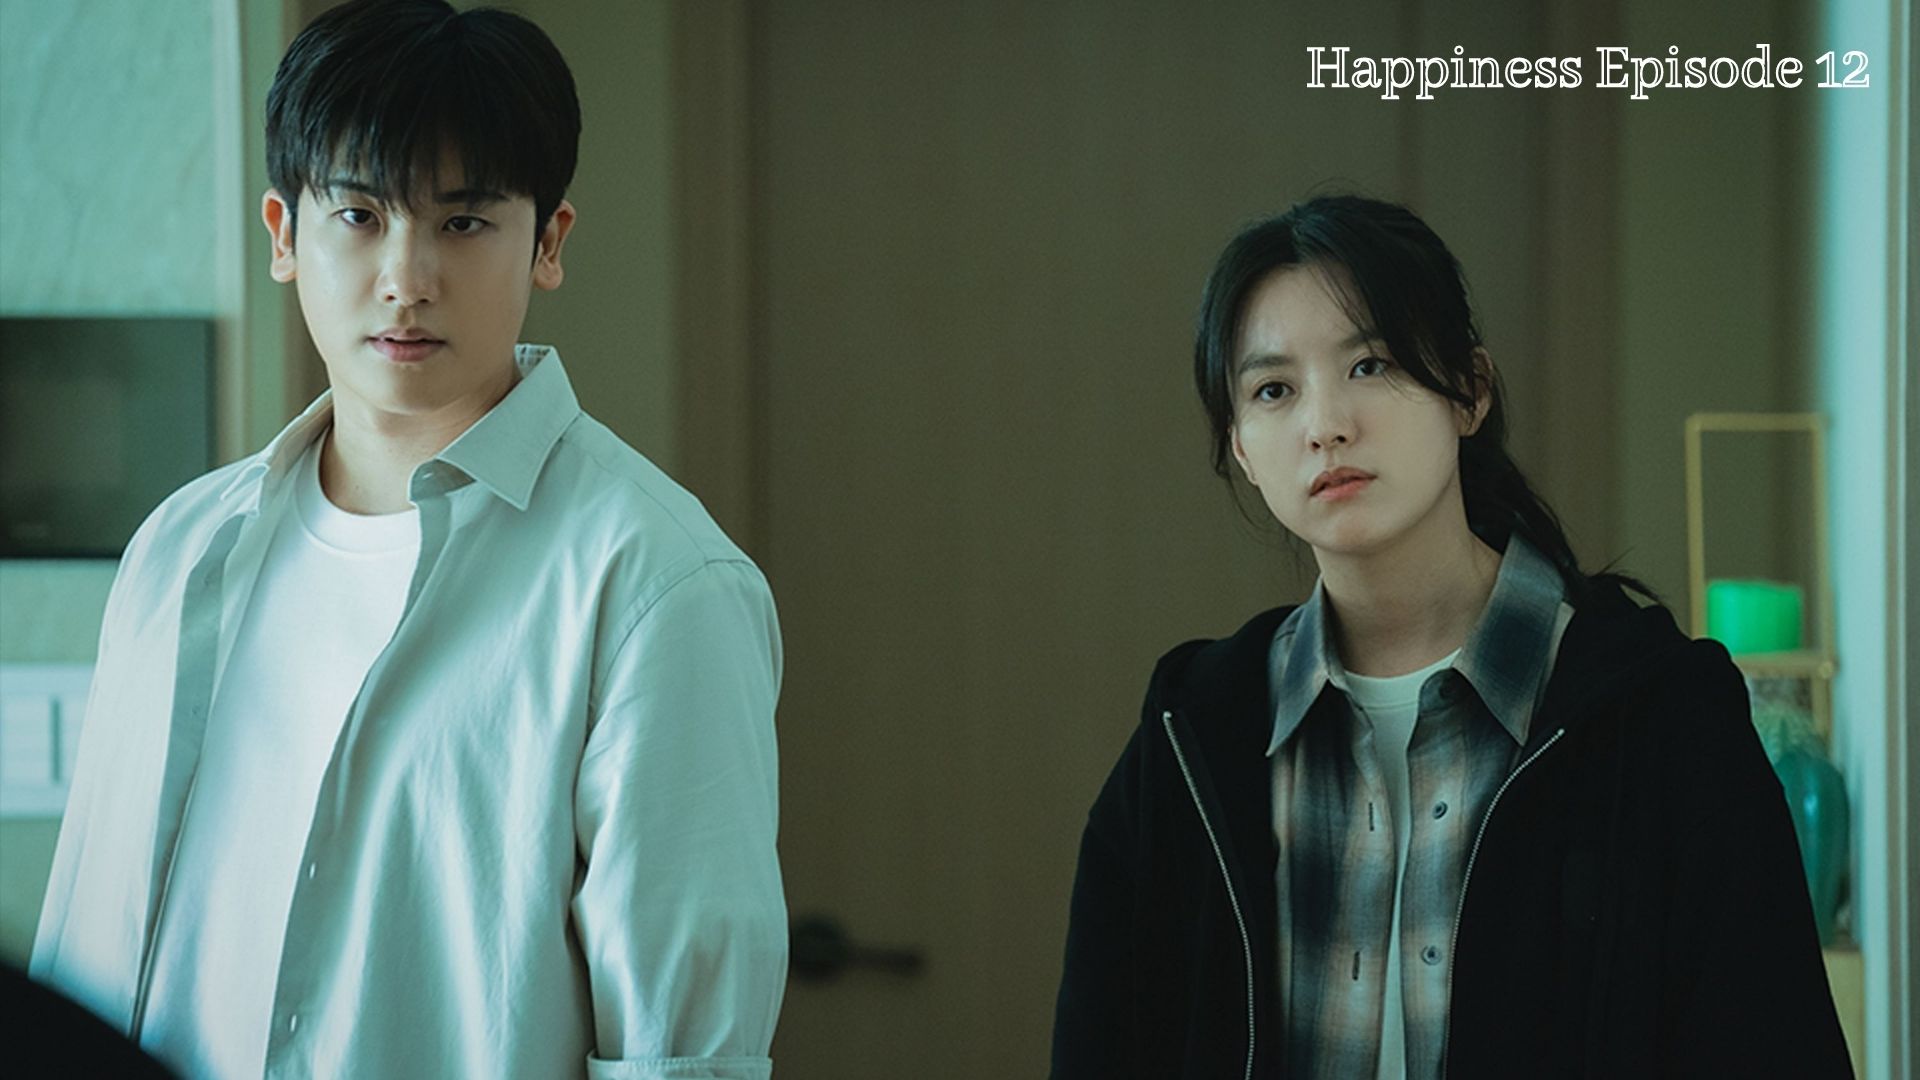 Does The Happiness Kdrama Have A Happy Ending?